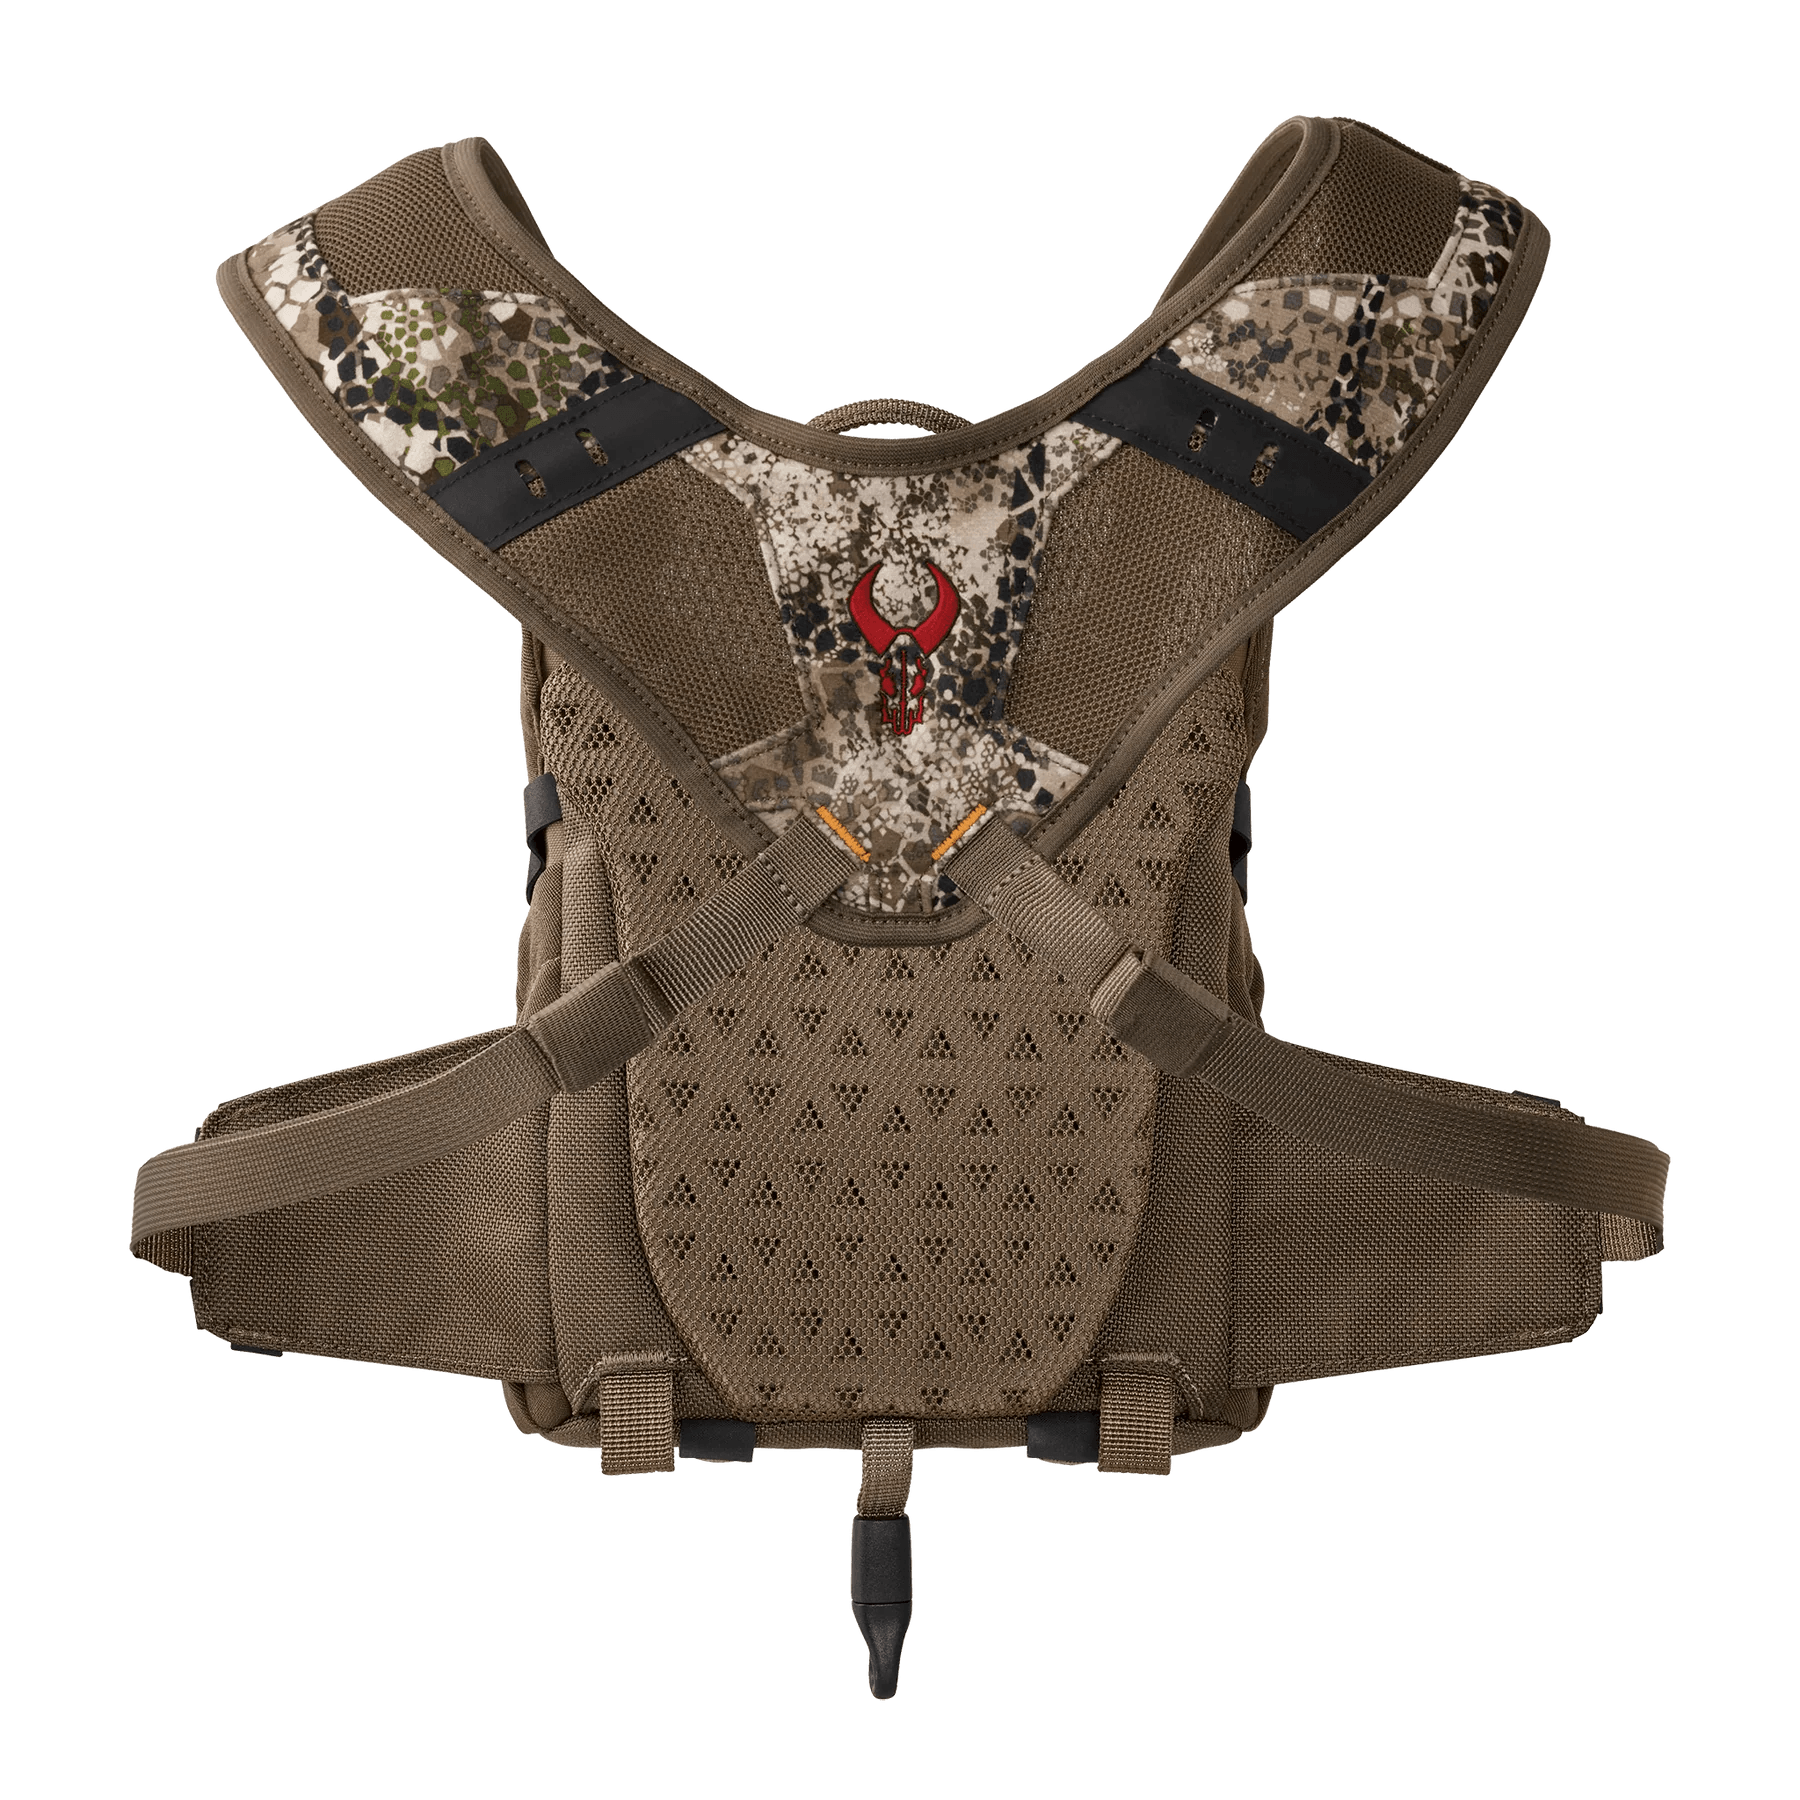 Badlands Bino X2 - Leapfrog Outdoor Sports and Apparel